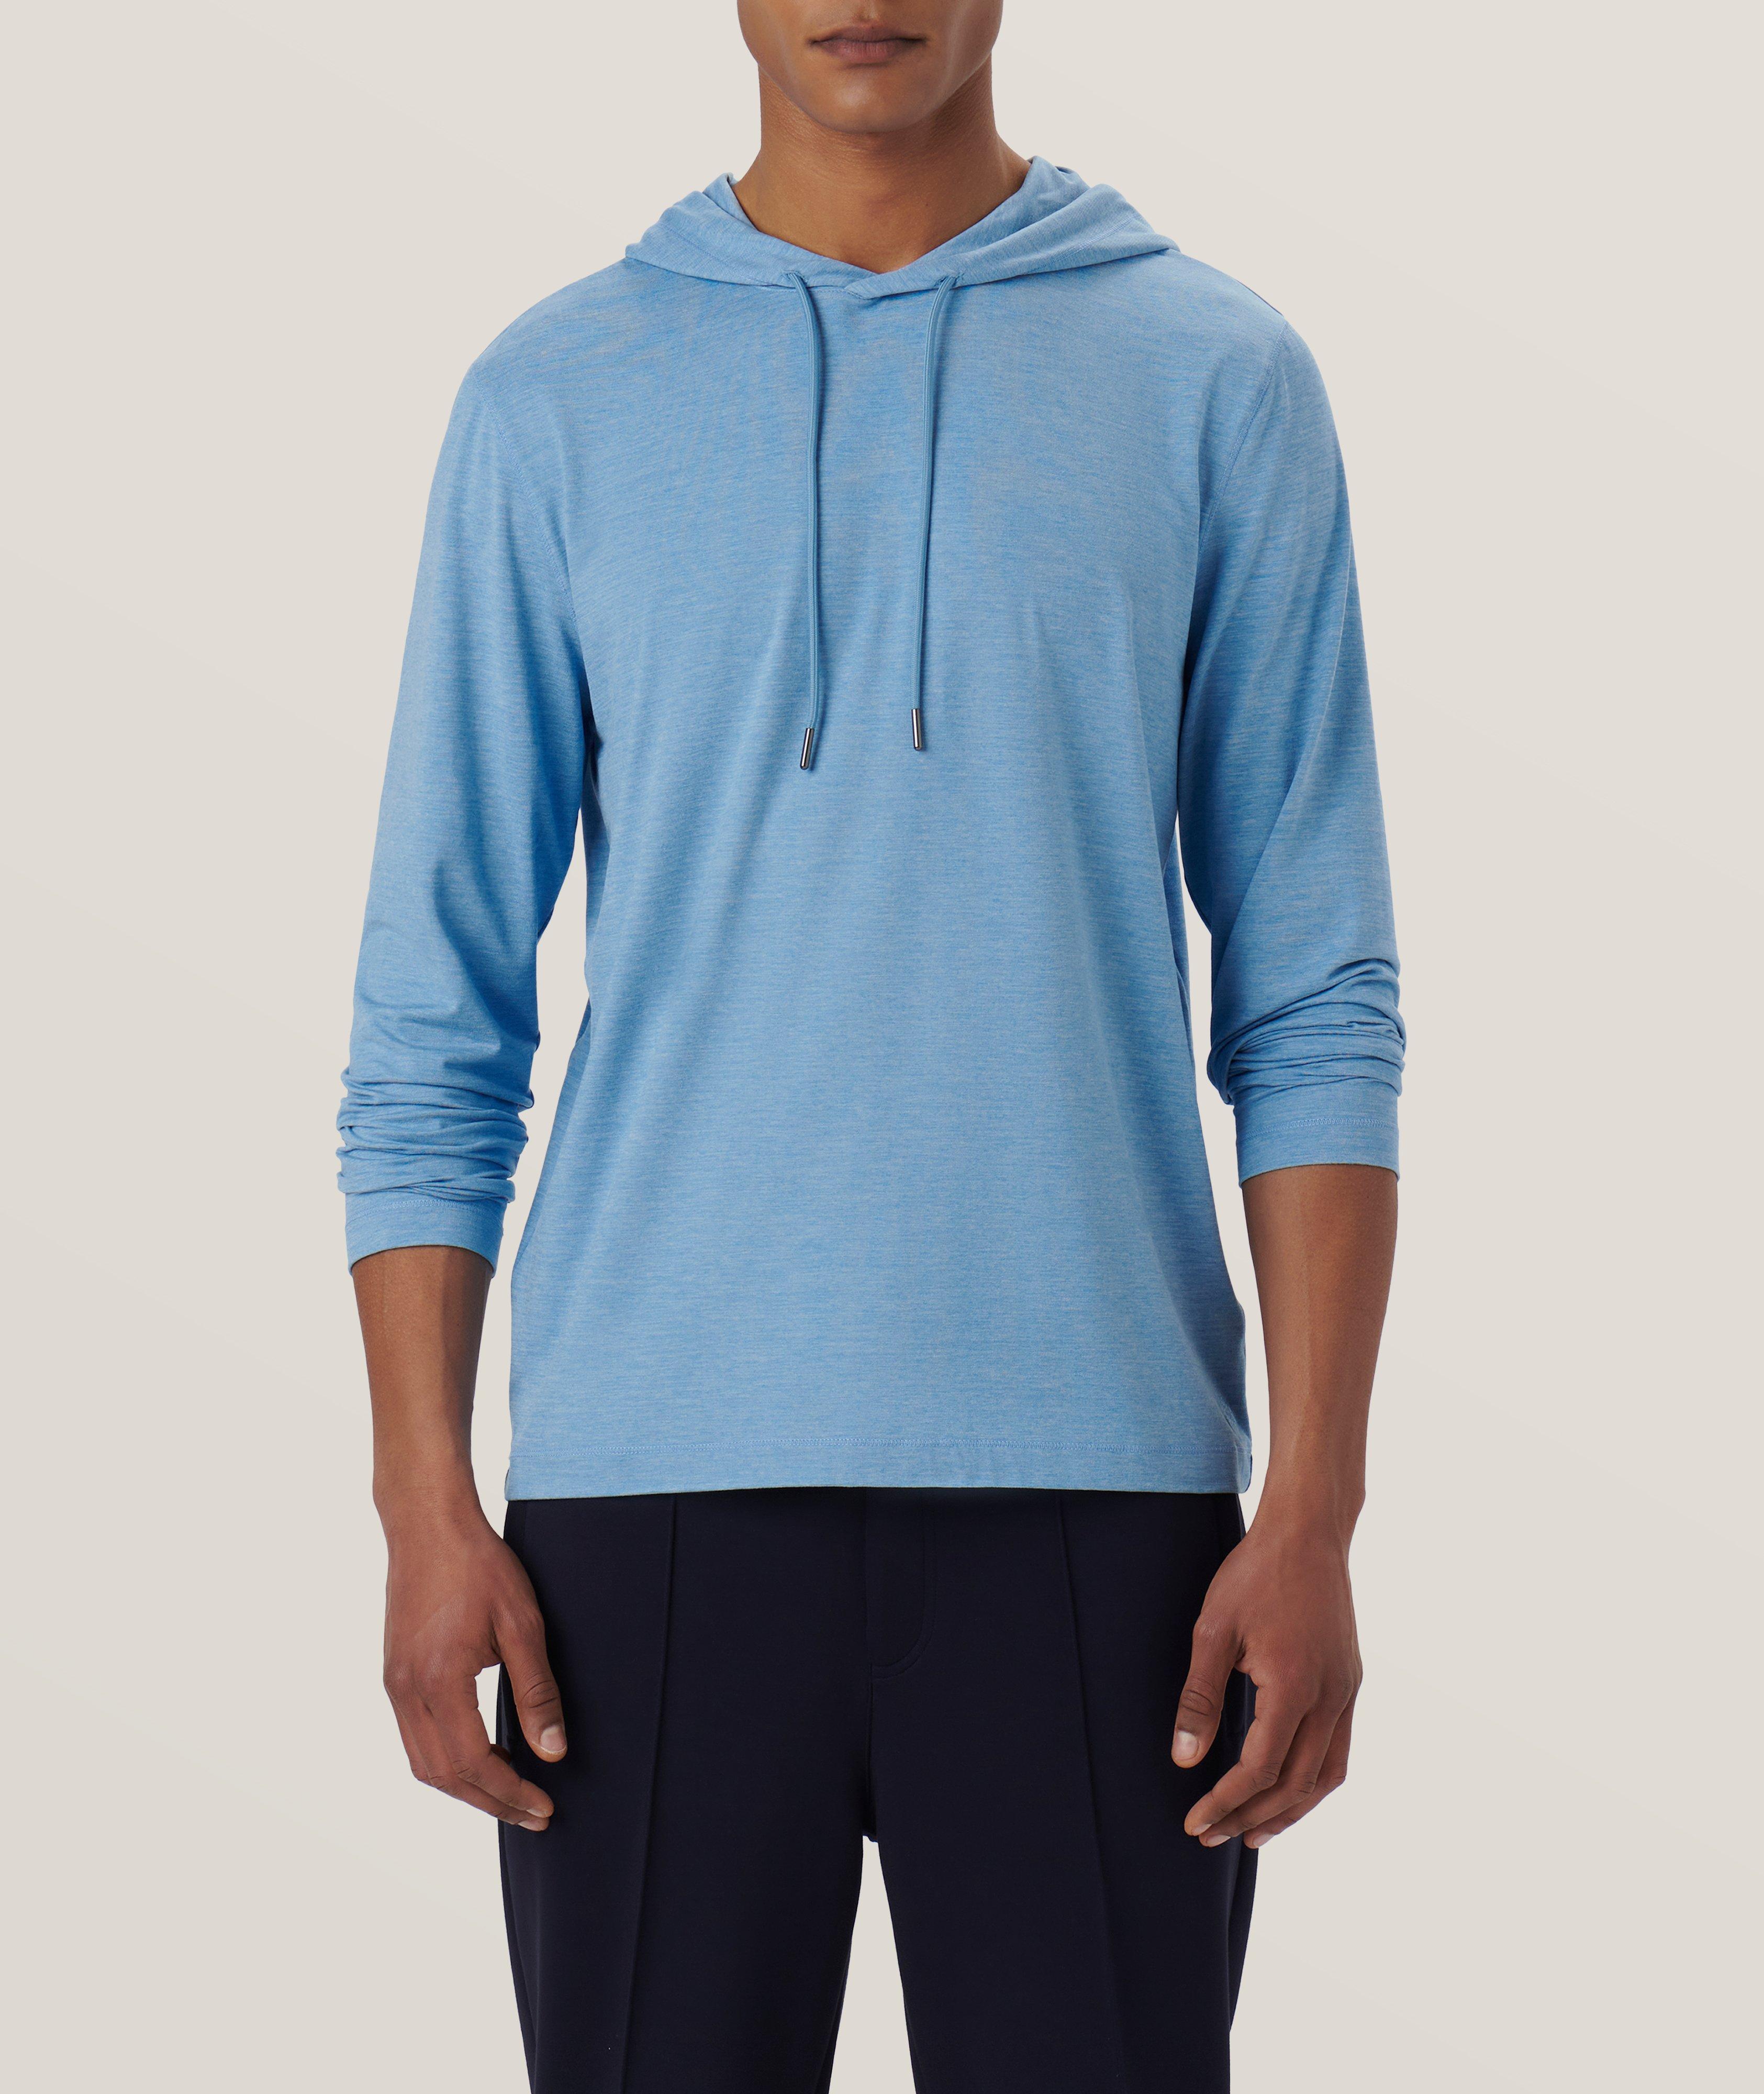 UV50 Performance Stretch-Fabric Hooded Sweater image 2